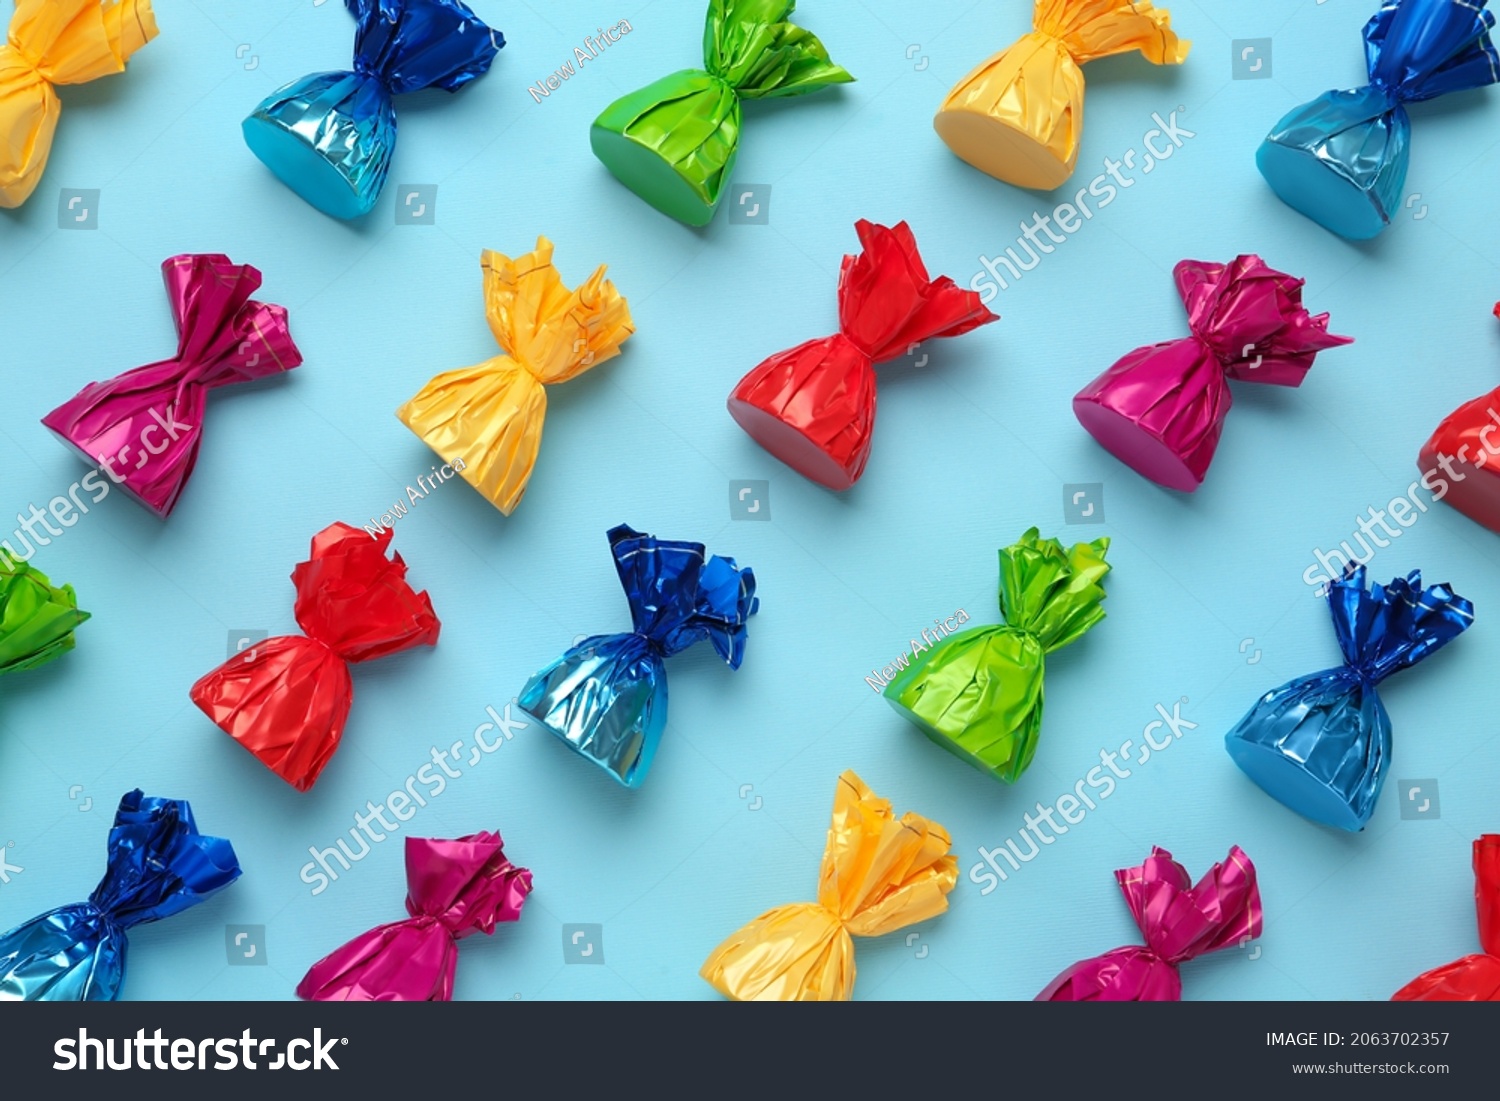 Candies in colorful wrappers on light blue background, flat lay #2063702357